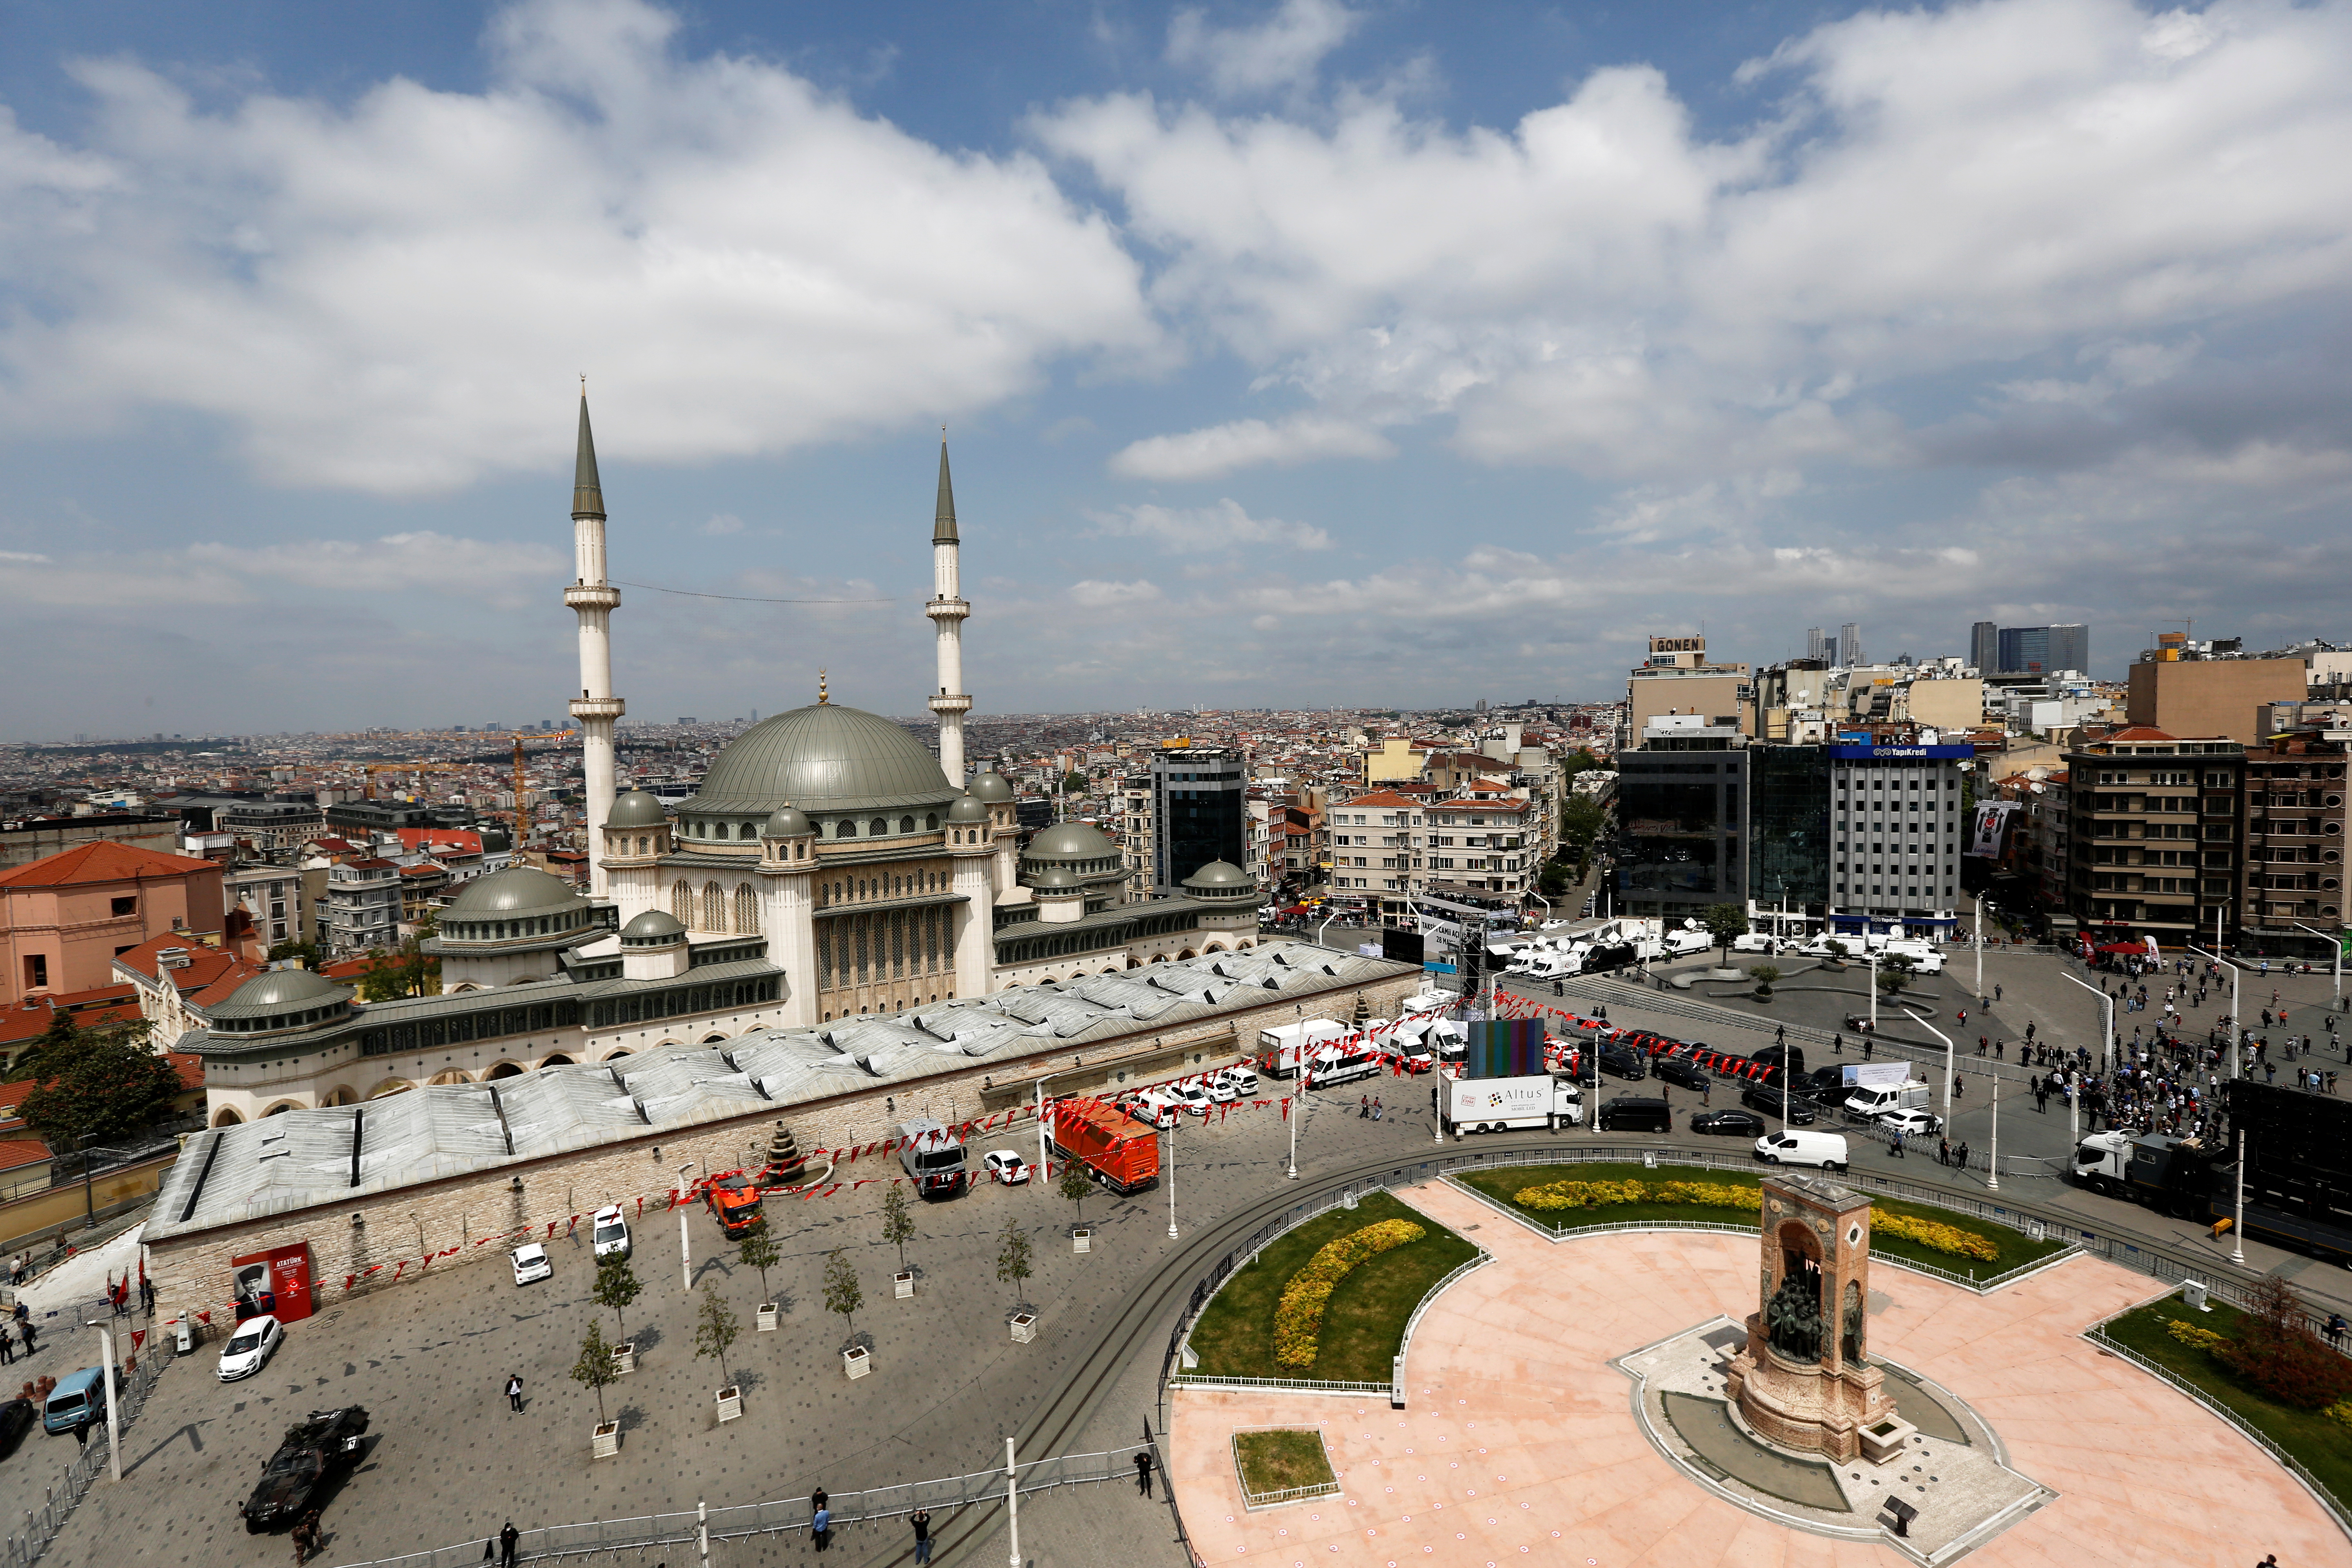 Erdogan inaugurates major new mosque in heart of Istanbul